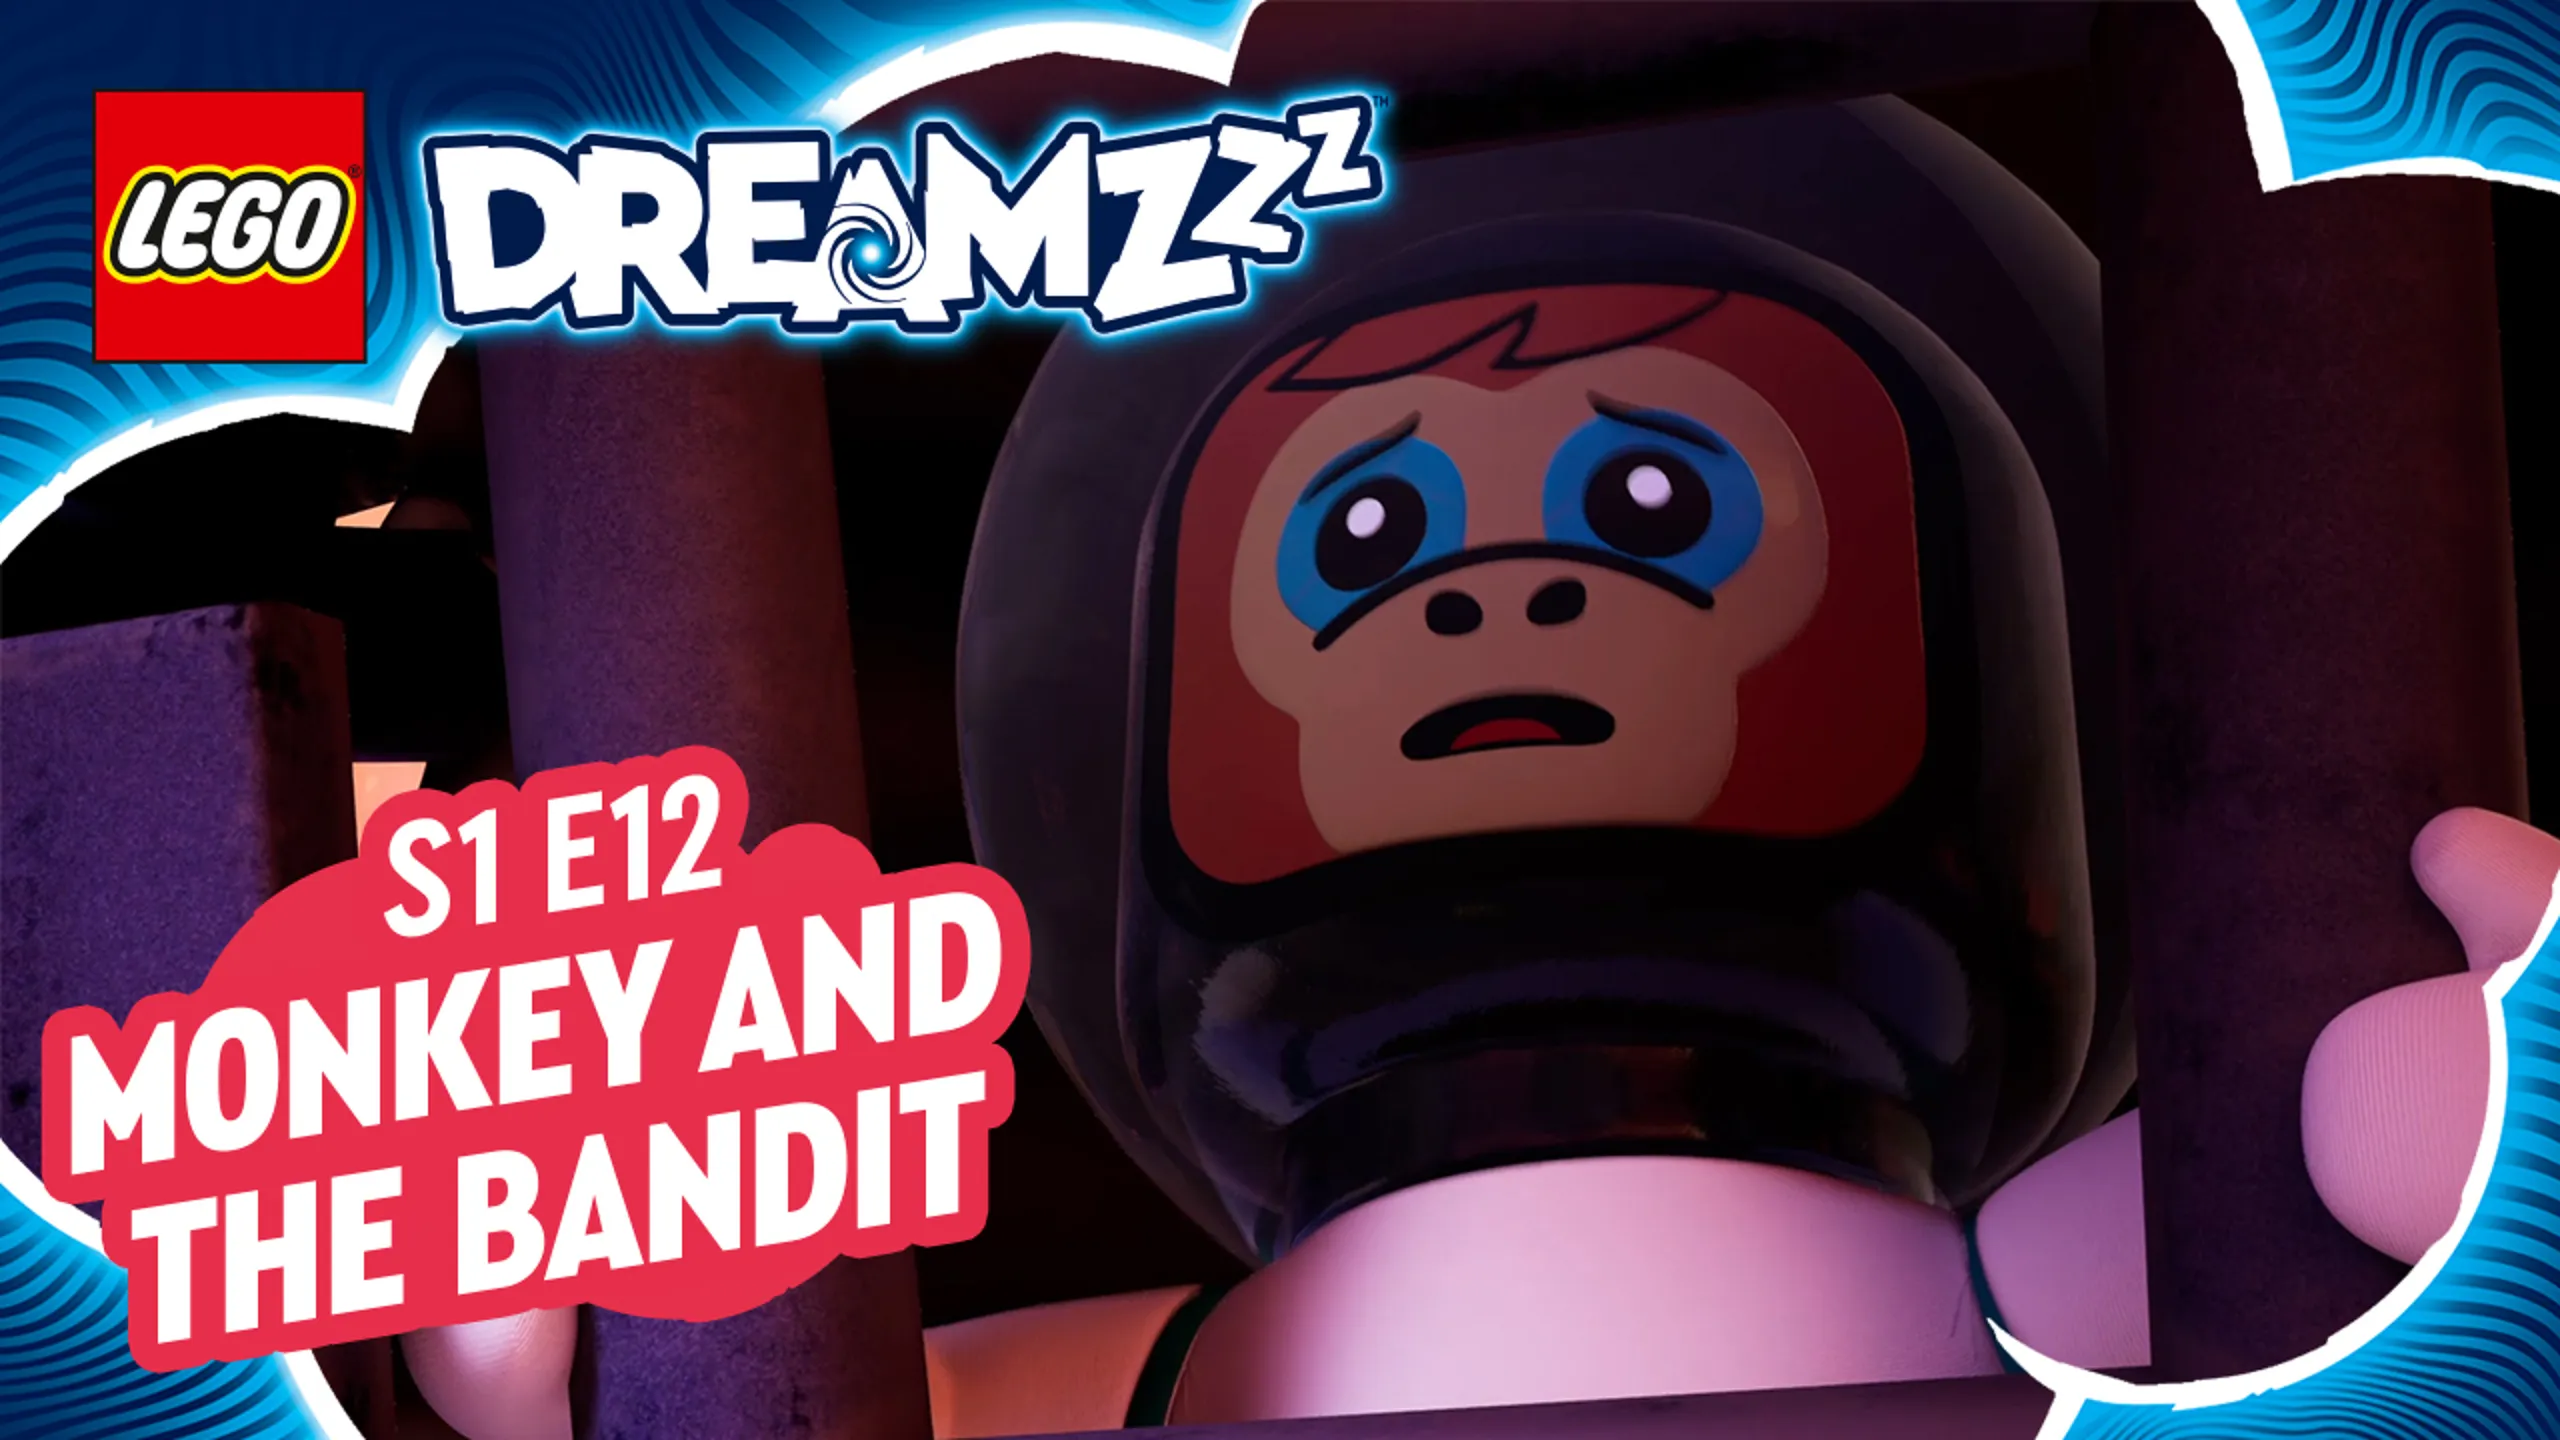 Cozy Little Dreamzzz on X: 🔥 🔥 🔥 CONTEST 🔥 🔥 🔥 Easy rules